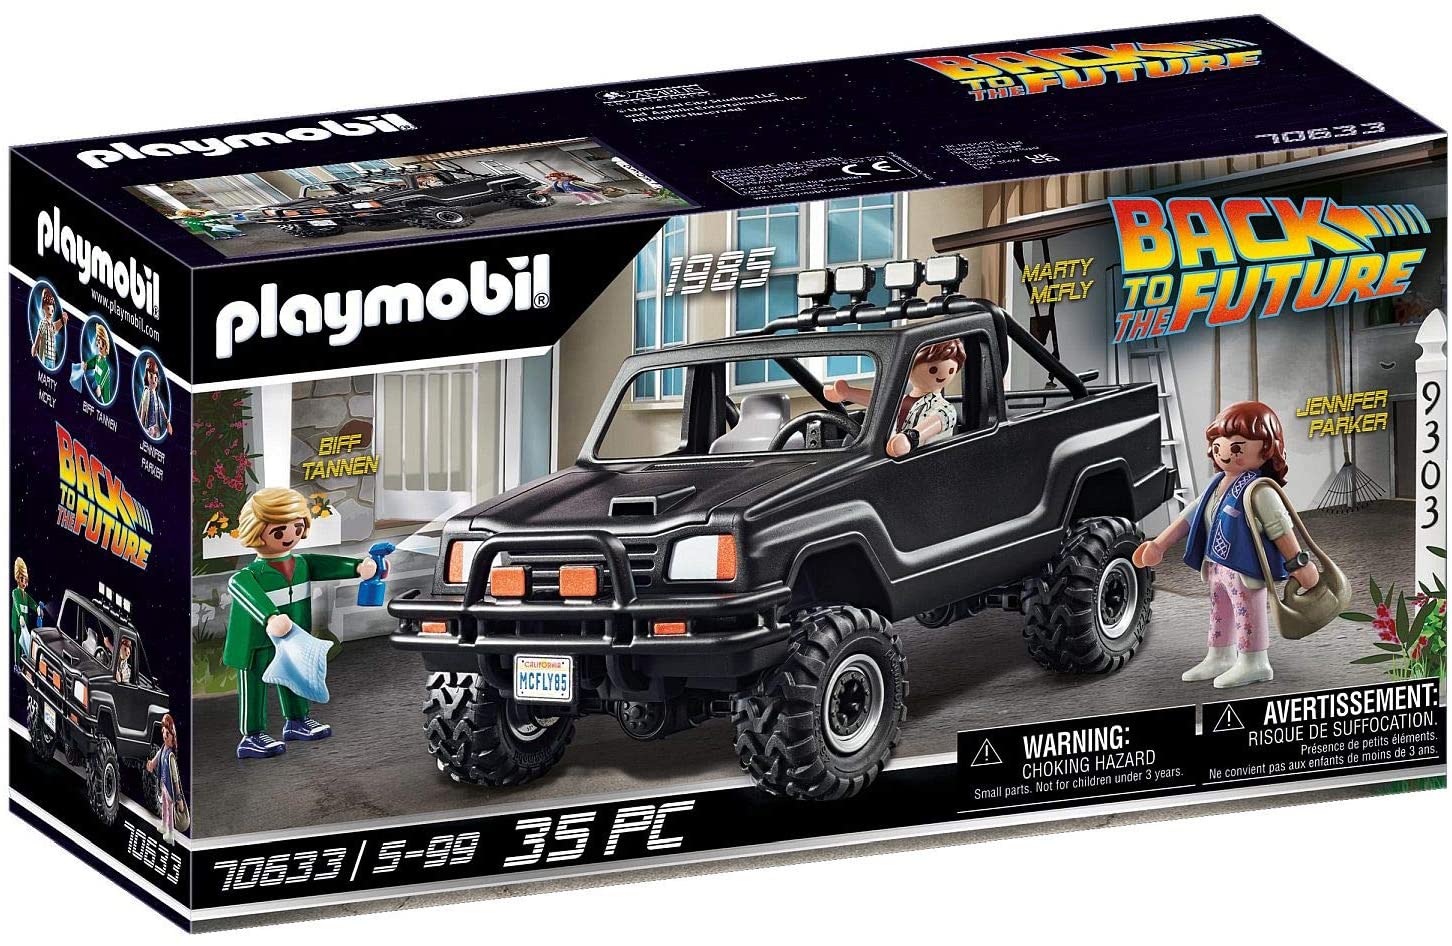 Playmobil Marty’s Pick-Up Truck from Back to the Future, Age 6 and Up, 7063